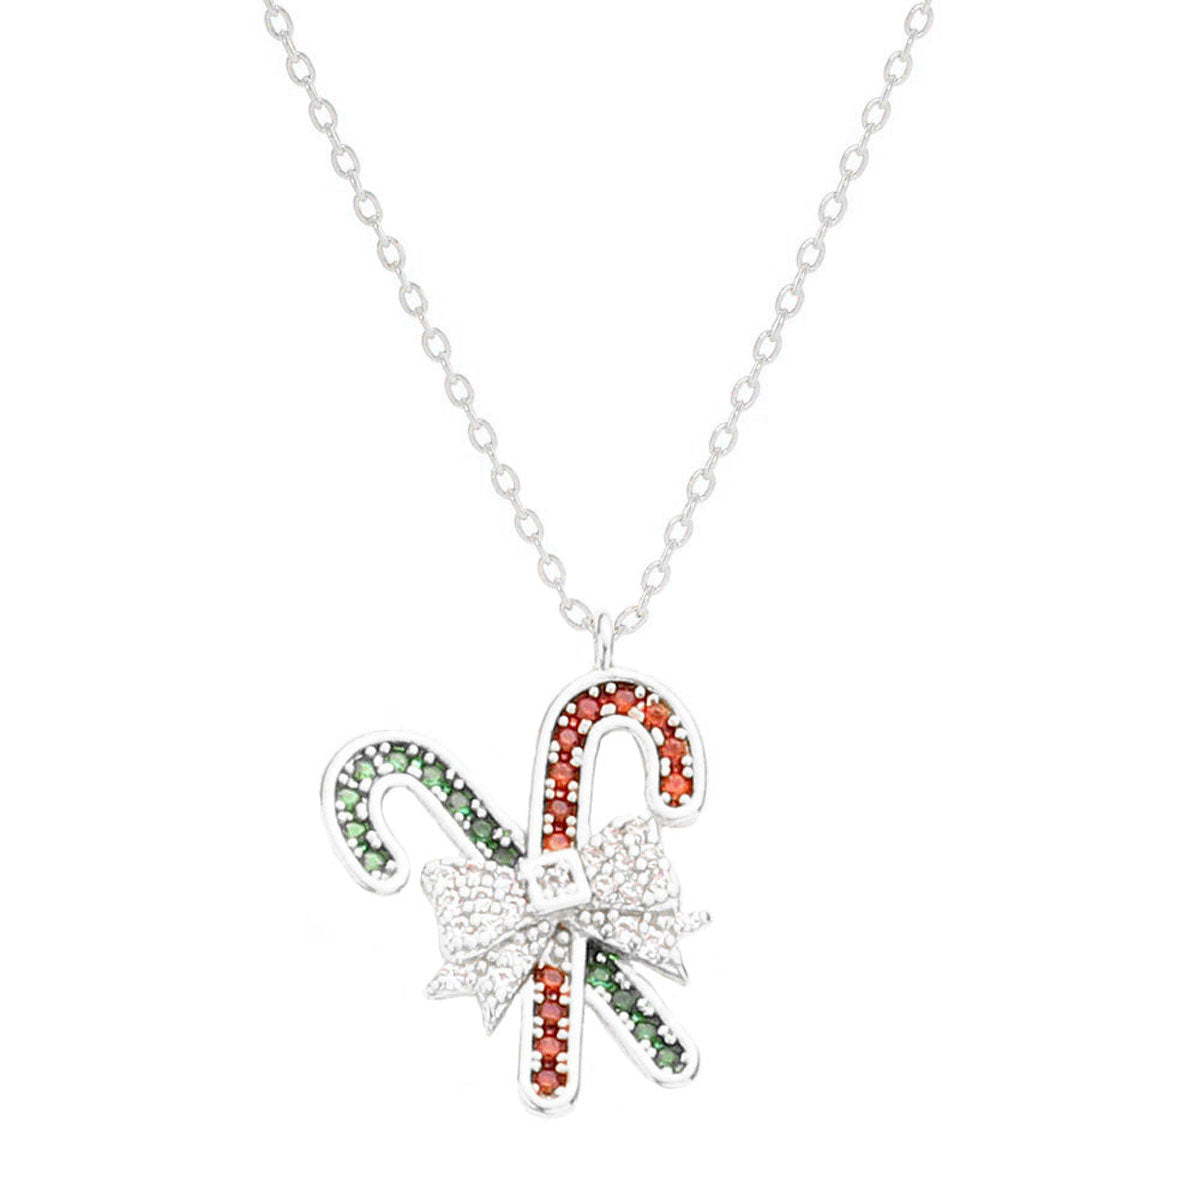 Rhodium Gold Dipped CZ Bow Candy Cane Pendant Necklace, Get ready with these Pendant Necklace, put on a pop of color to complete your ensemble. Perfect for adding just the right amount of shimmer & shine and a touch of class to special events. Perfect Birthday Gift, Anniversary Gift, Mother's Day Gift, Graduation Gift.